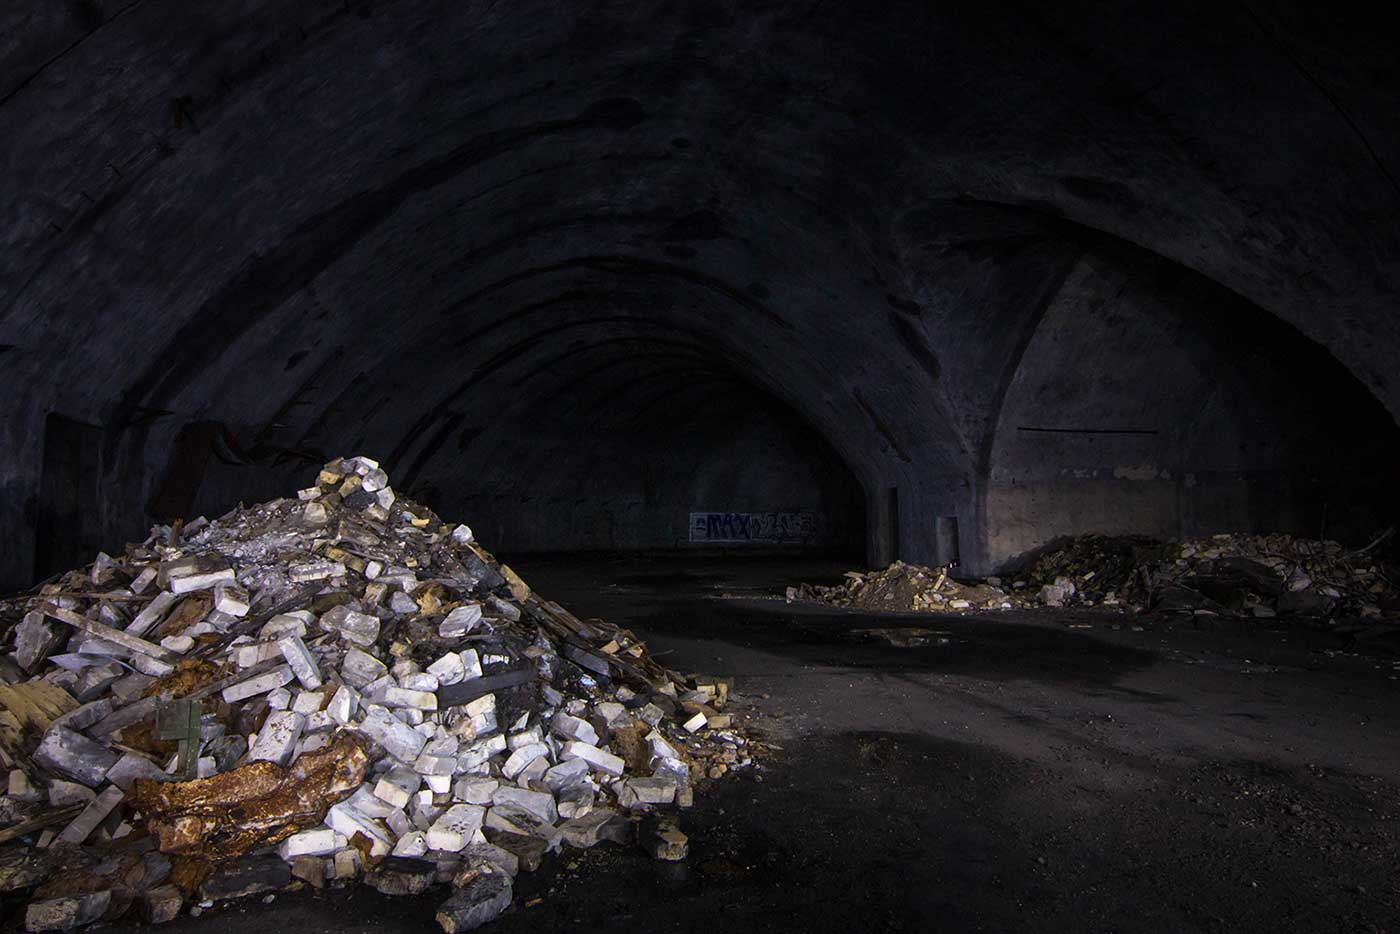 Today the underground aircraft galleries of the Željava Airbase are bare and abandoned, forming a pitch-black labyrinth beneath the mountain.